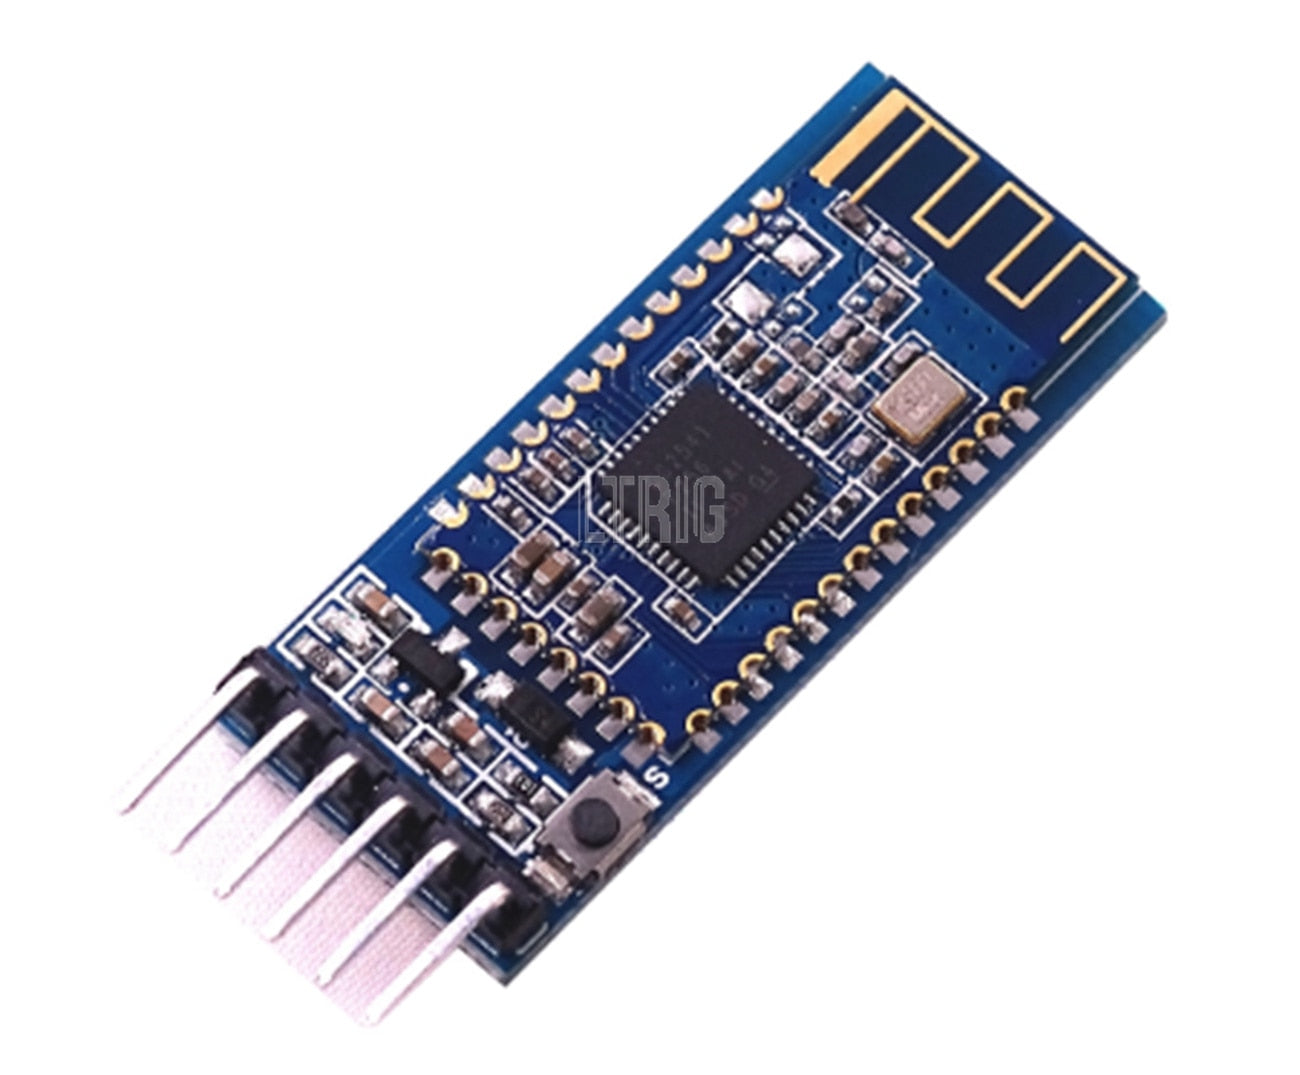 Details about   for Arduino Android IOS HM-10 BLE Bluetooth 4.0 CC2540 CC2541 Wireless Modulju 